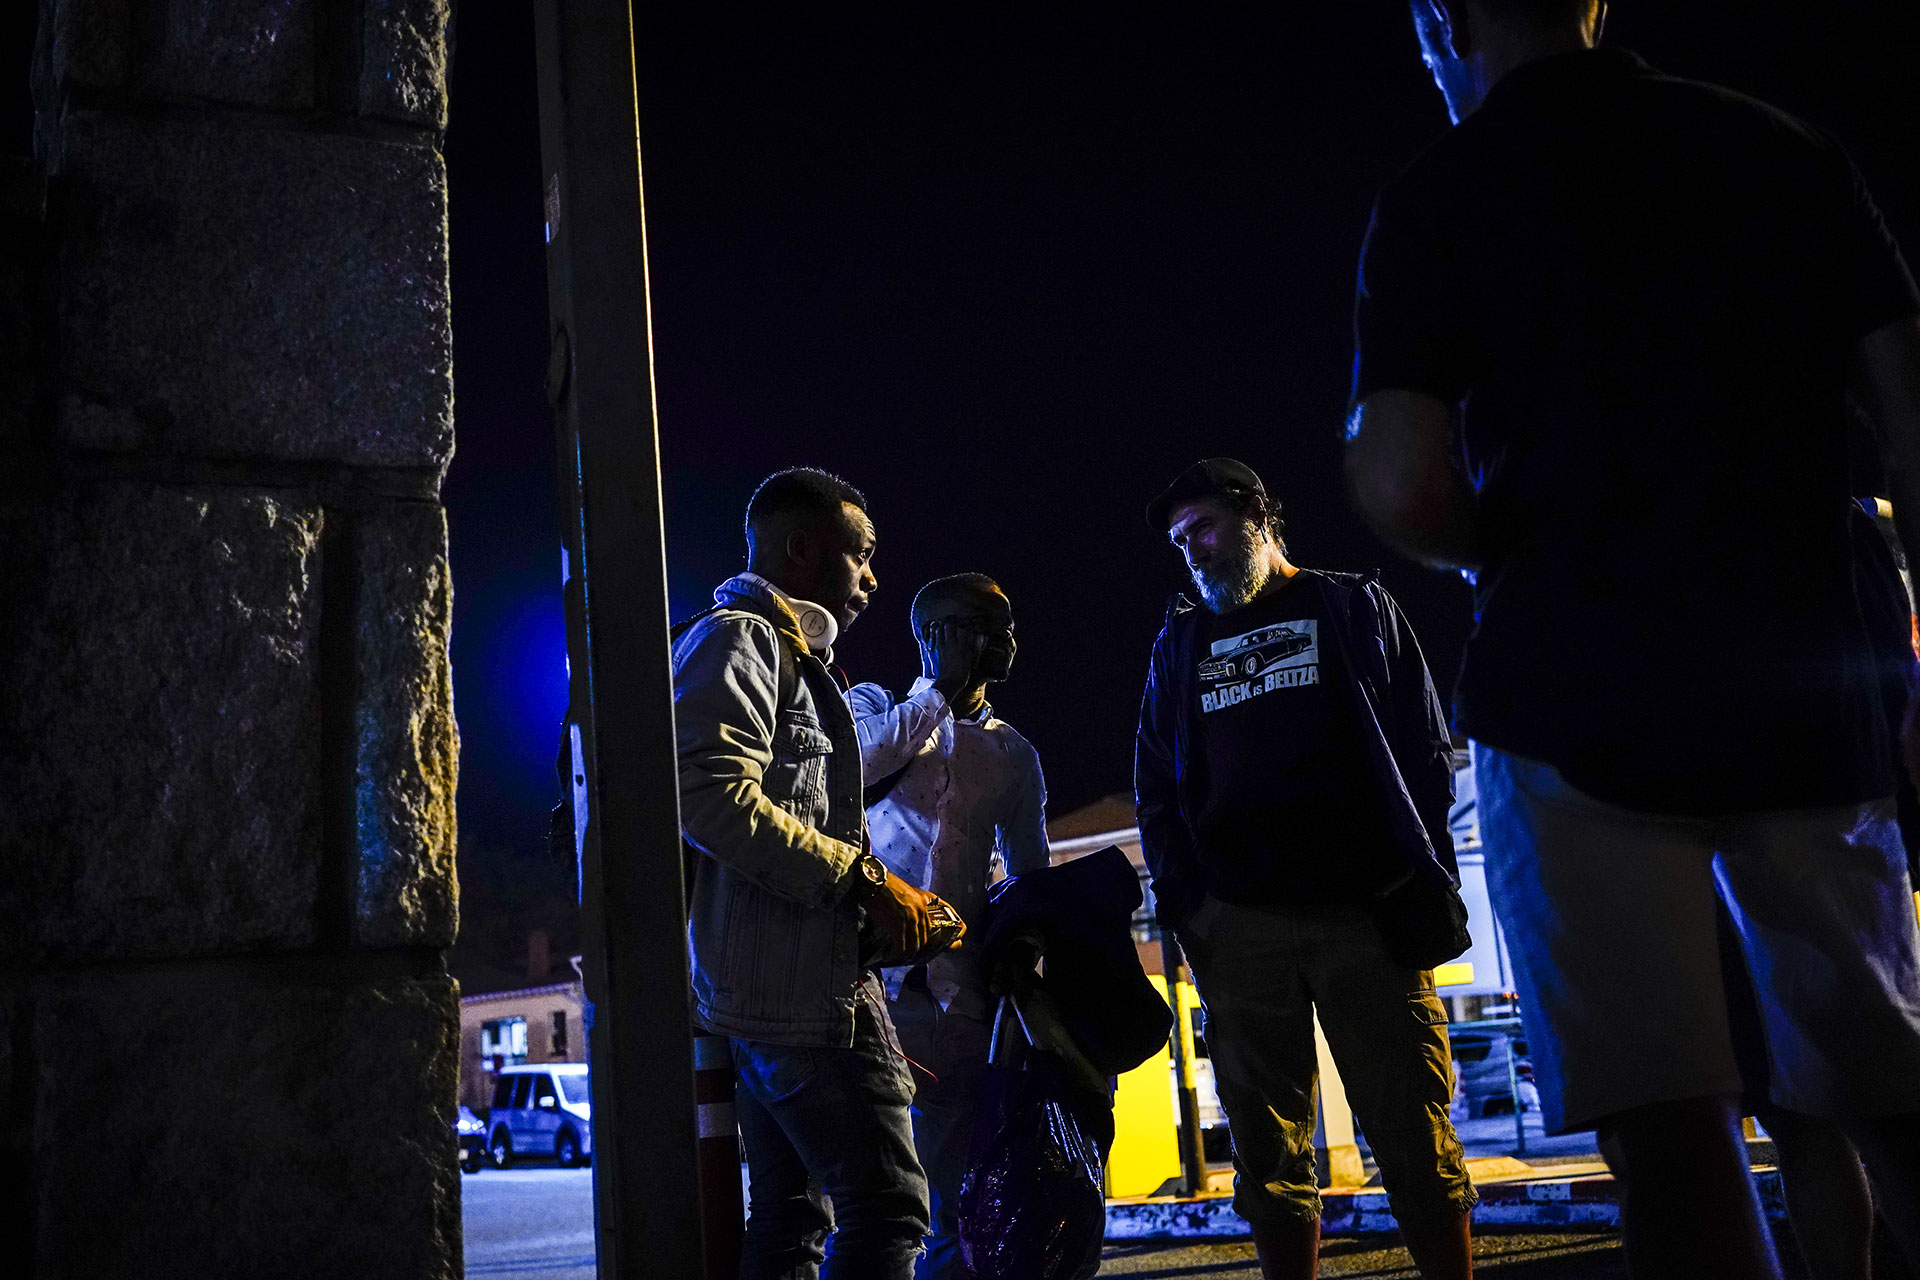 Members of Irungo Harrera Sarea talk to a young man who has just arrived at the Irún bus station, September 16, 2019.